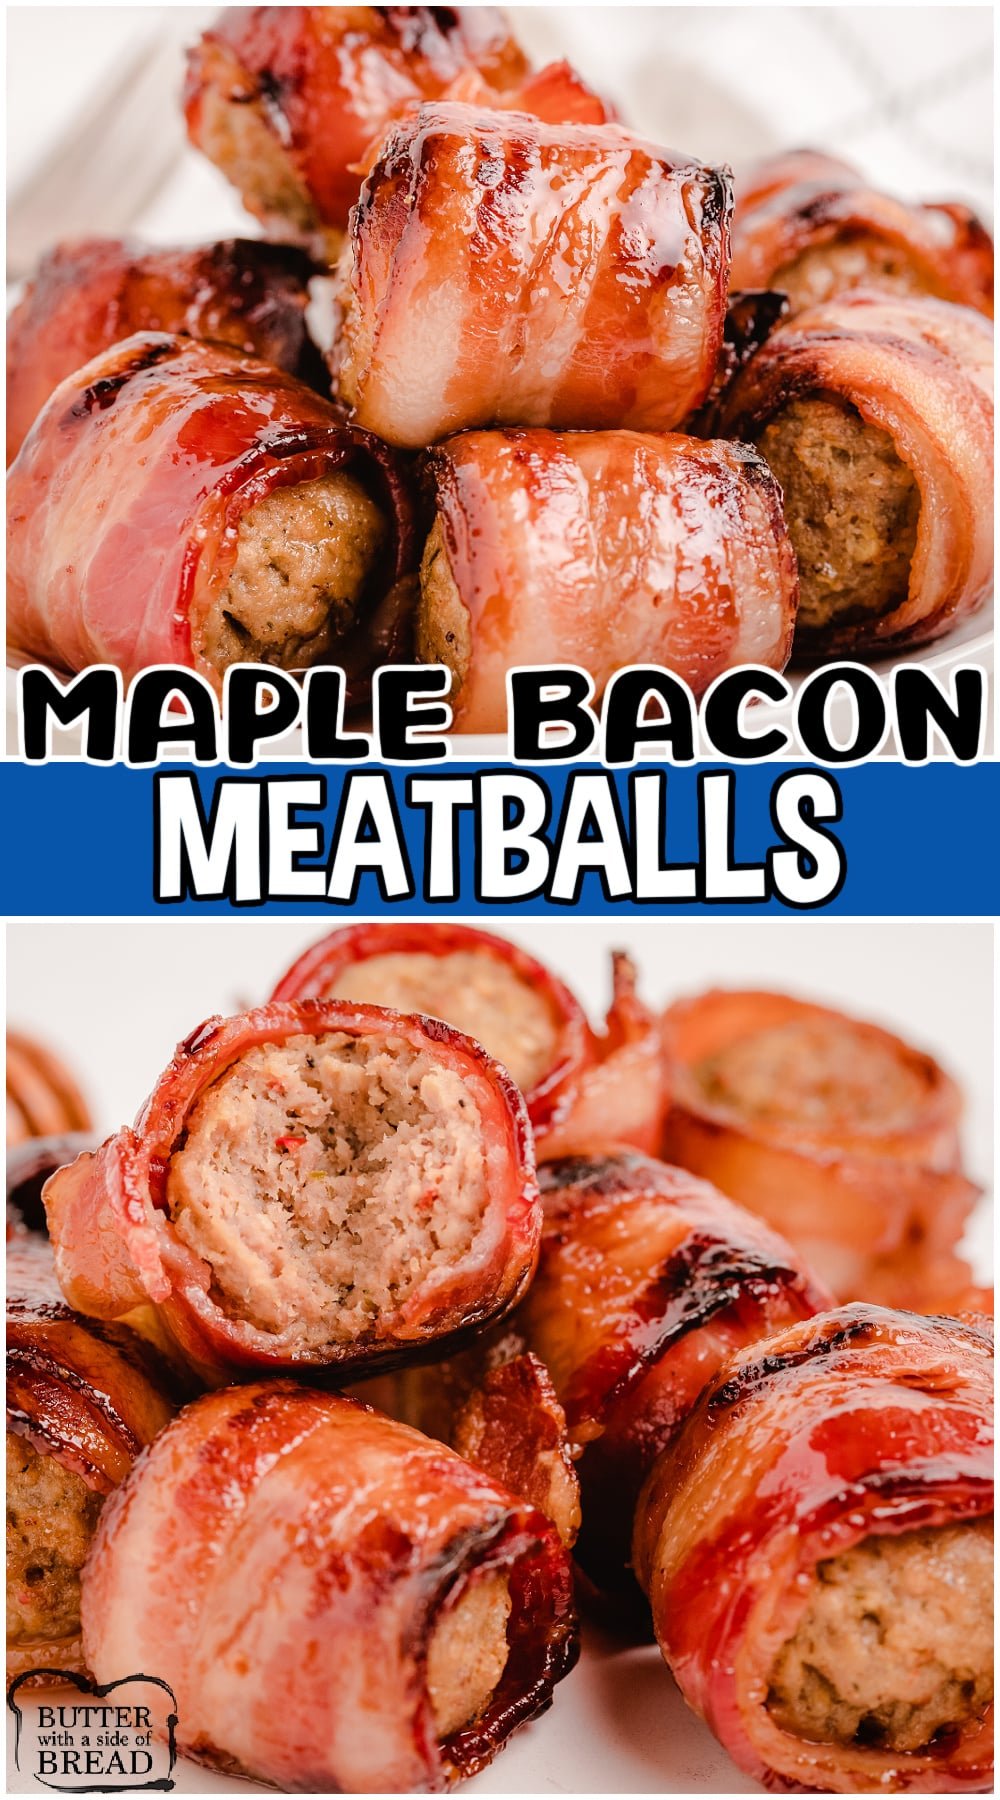 Bacon Wrapped Meatballs made with just 3 ingredients & fantastic savory sweet flavors! These toothpick appetizer meatballs are perfect for parties, tailgating or anytime you want to eat BACON!